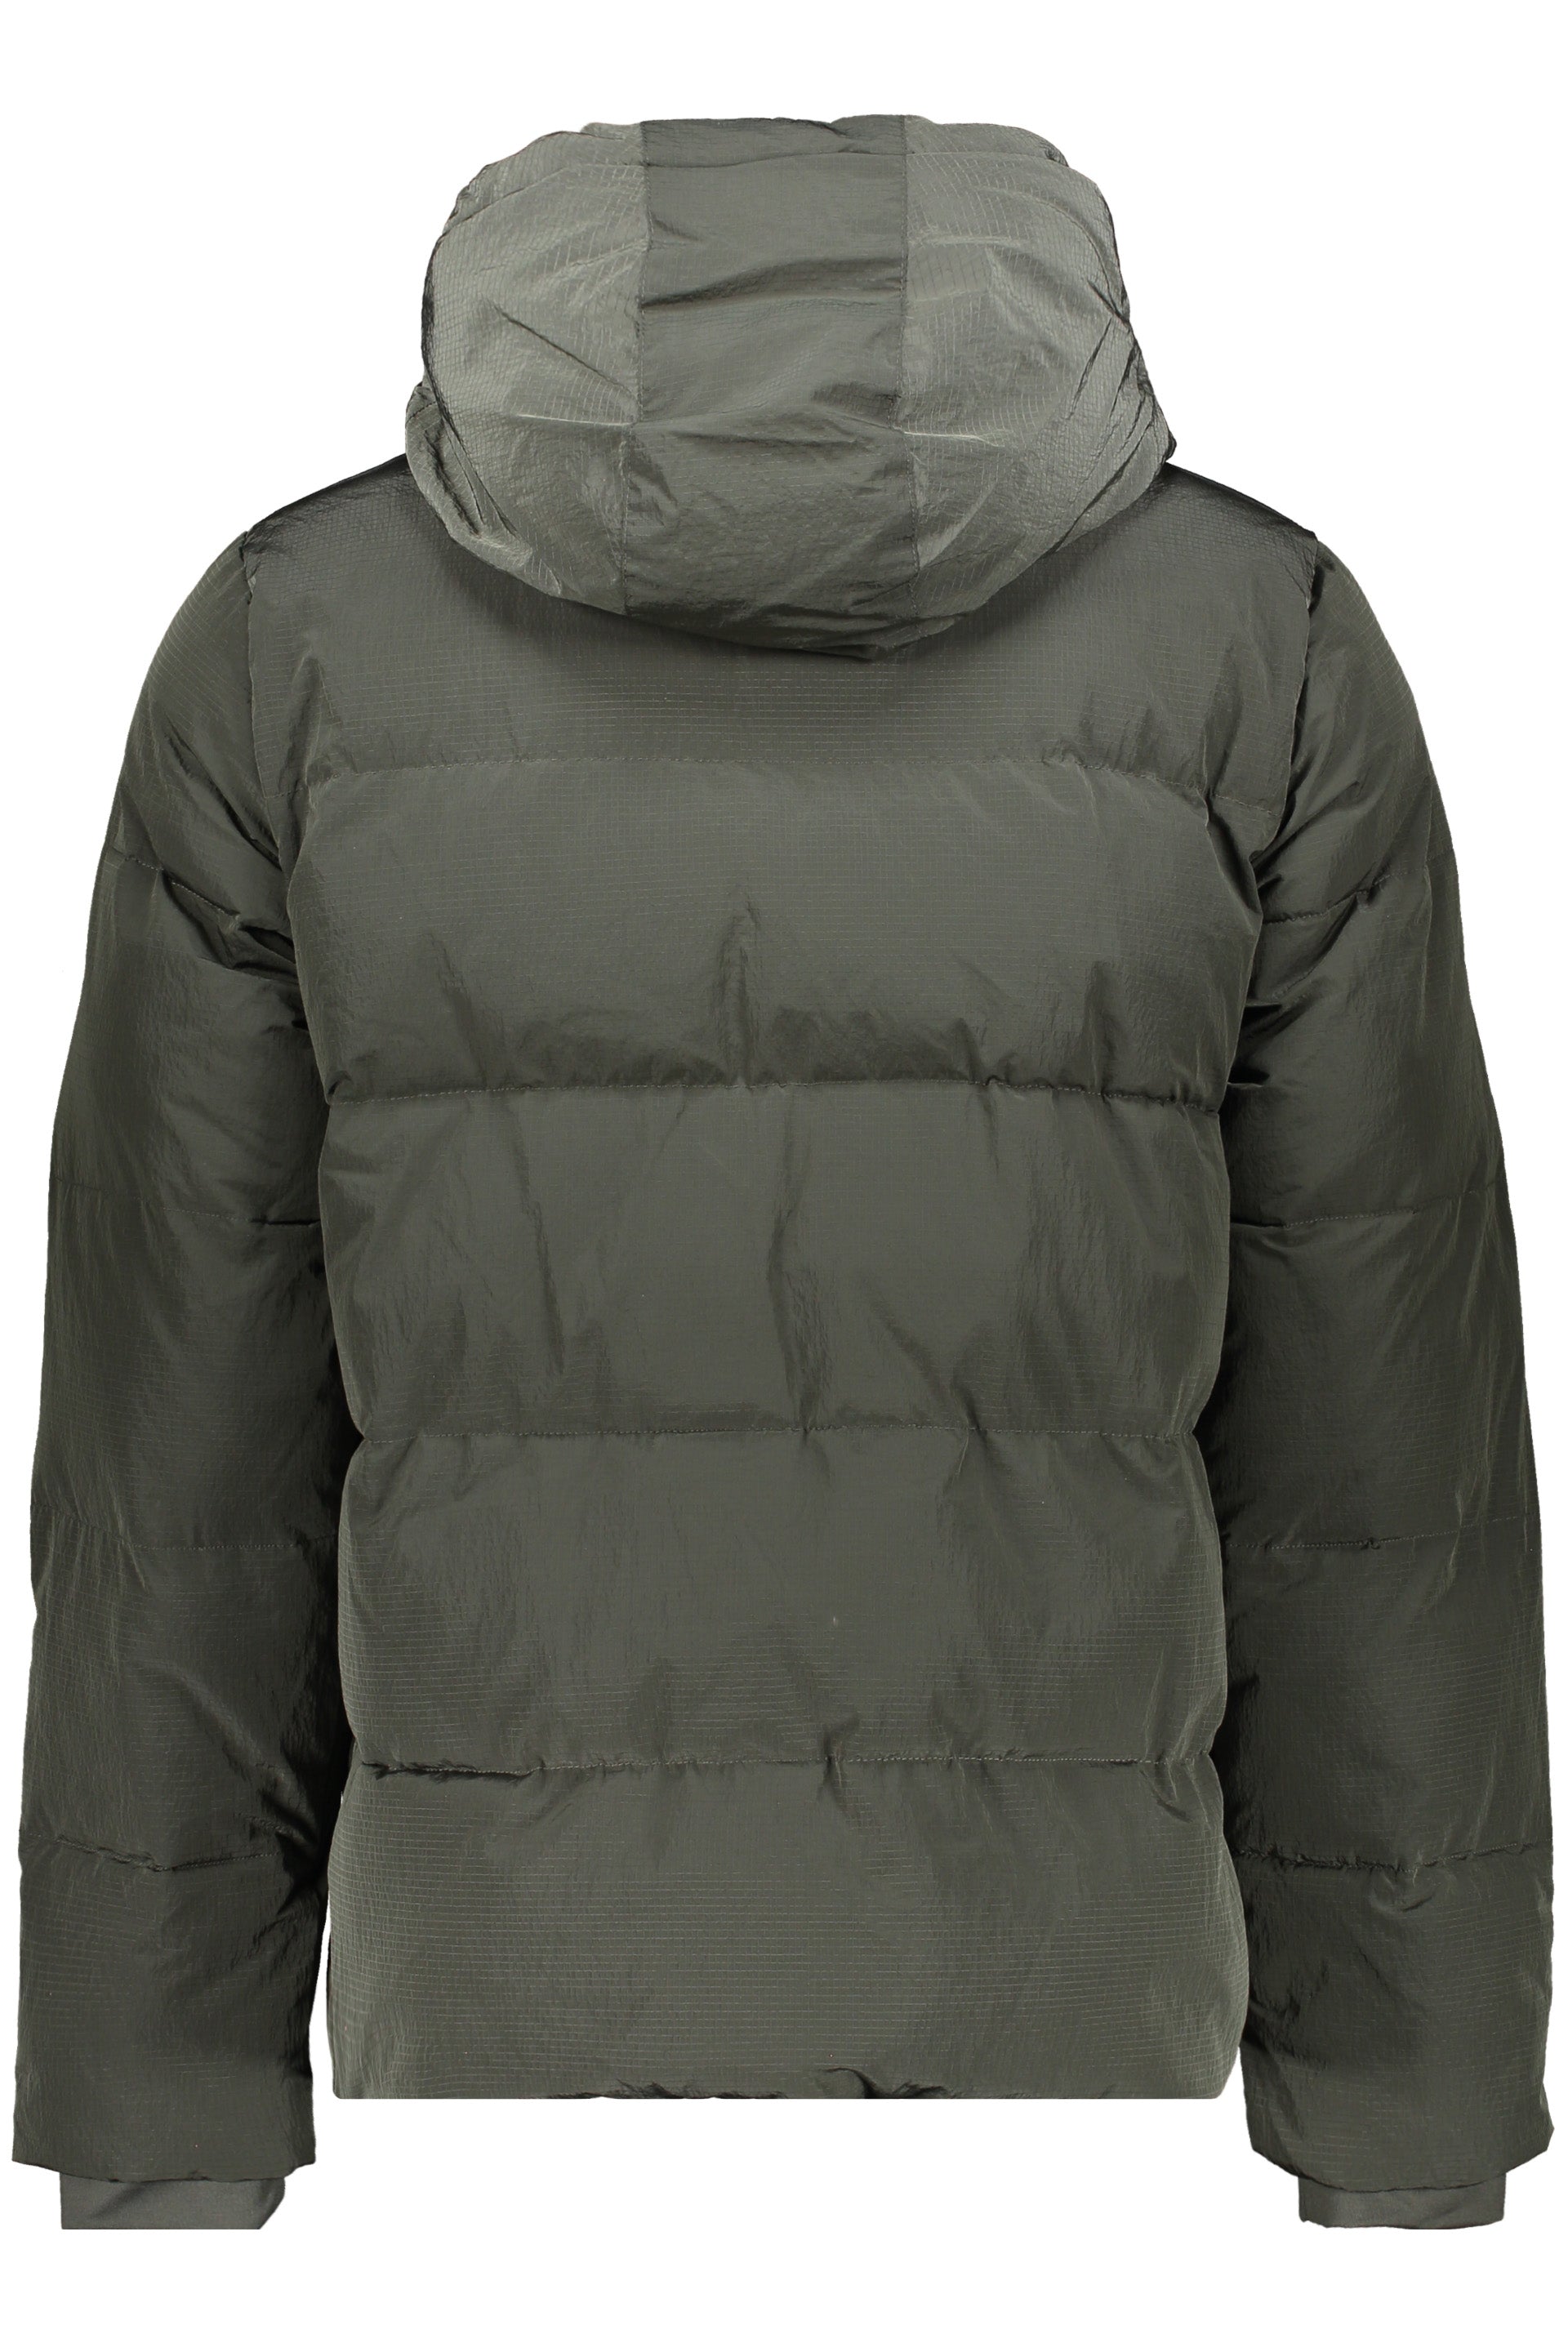 Hooded down jacket-K-Way-OUTLET-SALE-ARCHIVIST